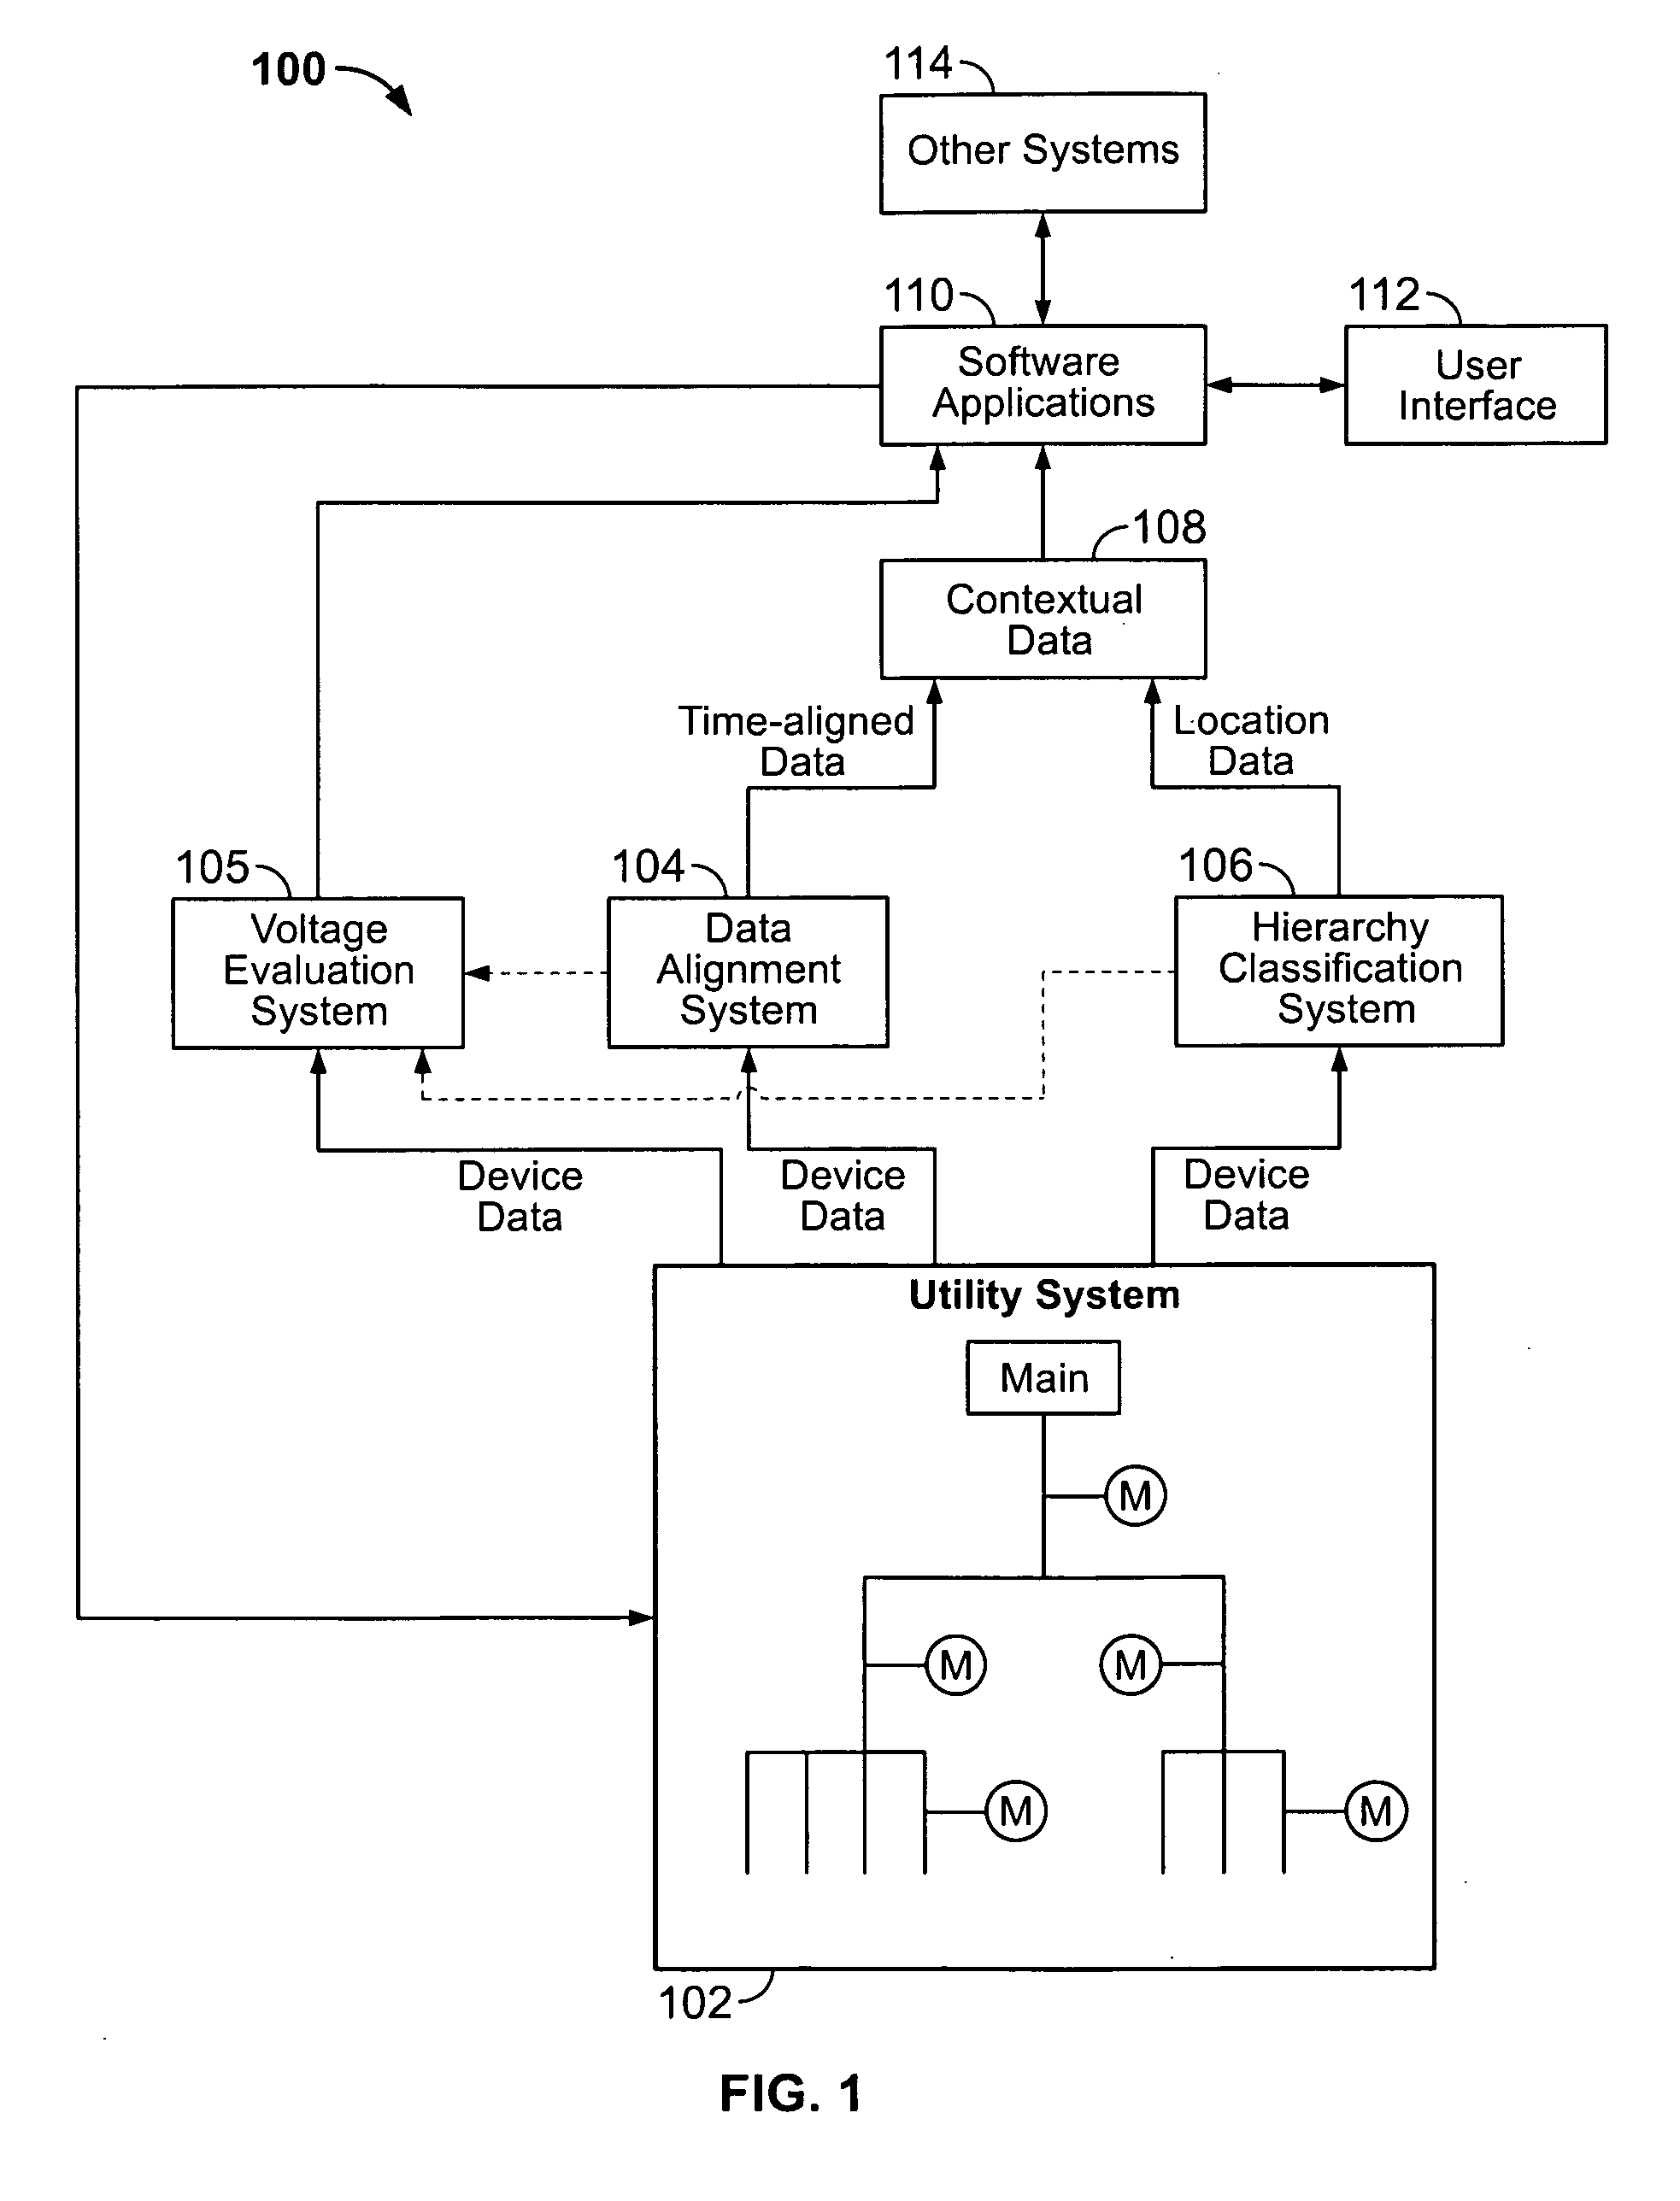 Automated voltage analysis in an electrical system using contextual data